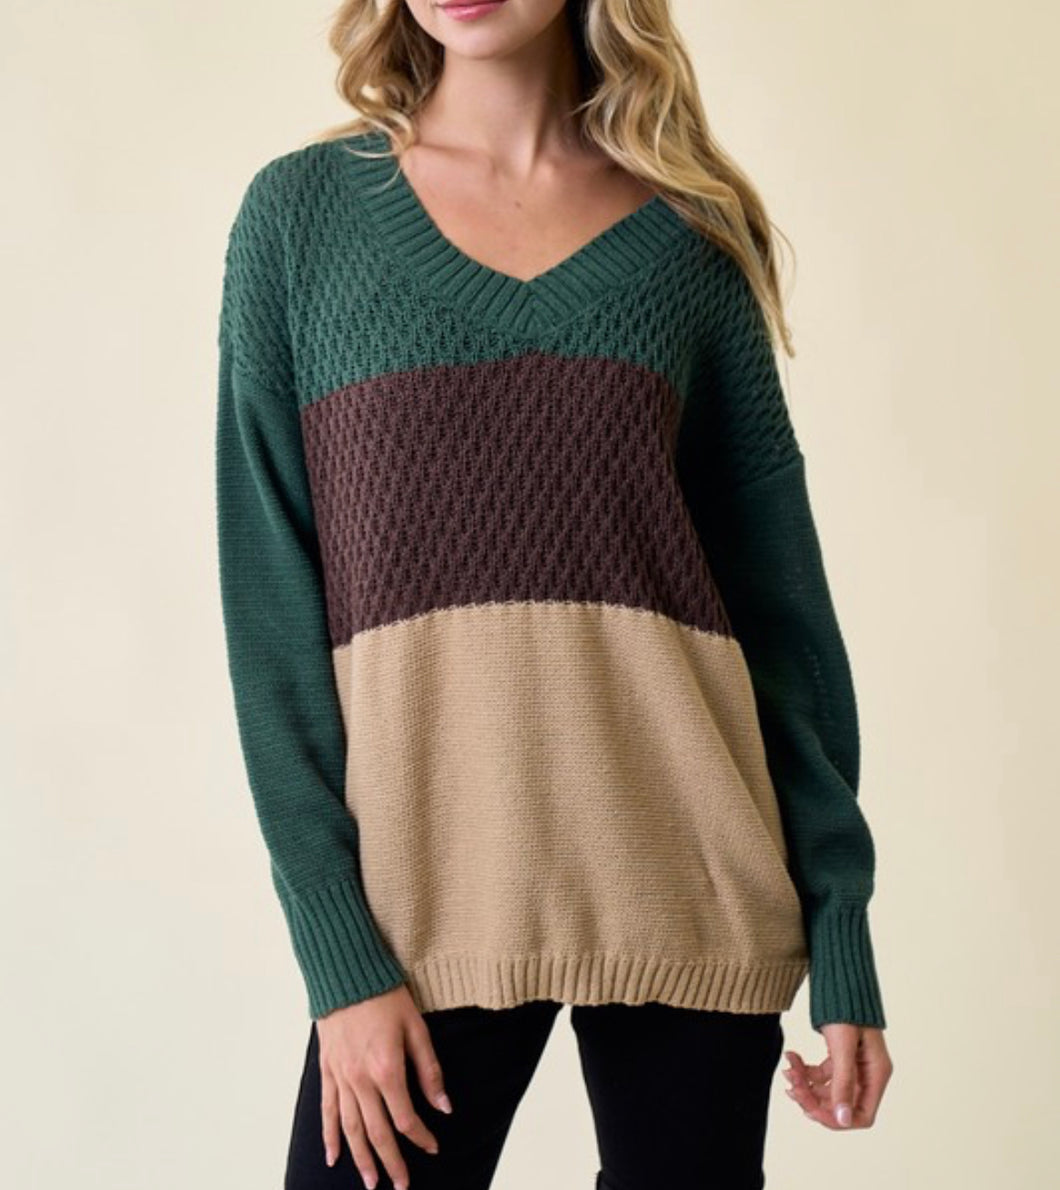 SALE! Emerald and Brown Color Block Sweater